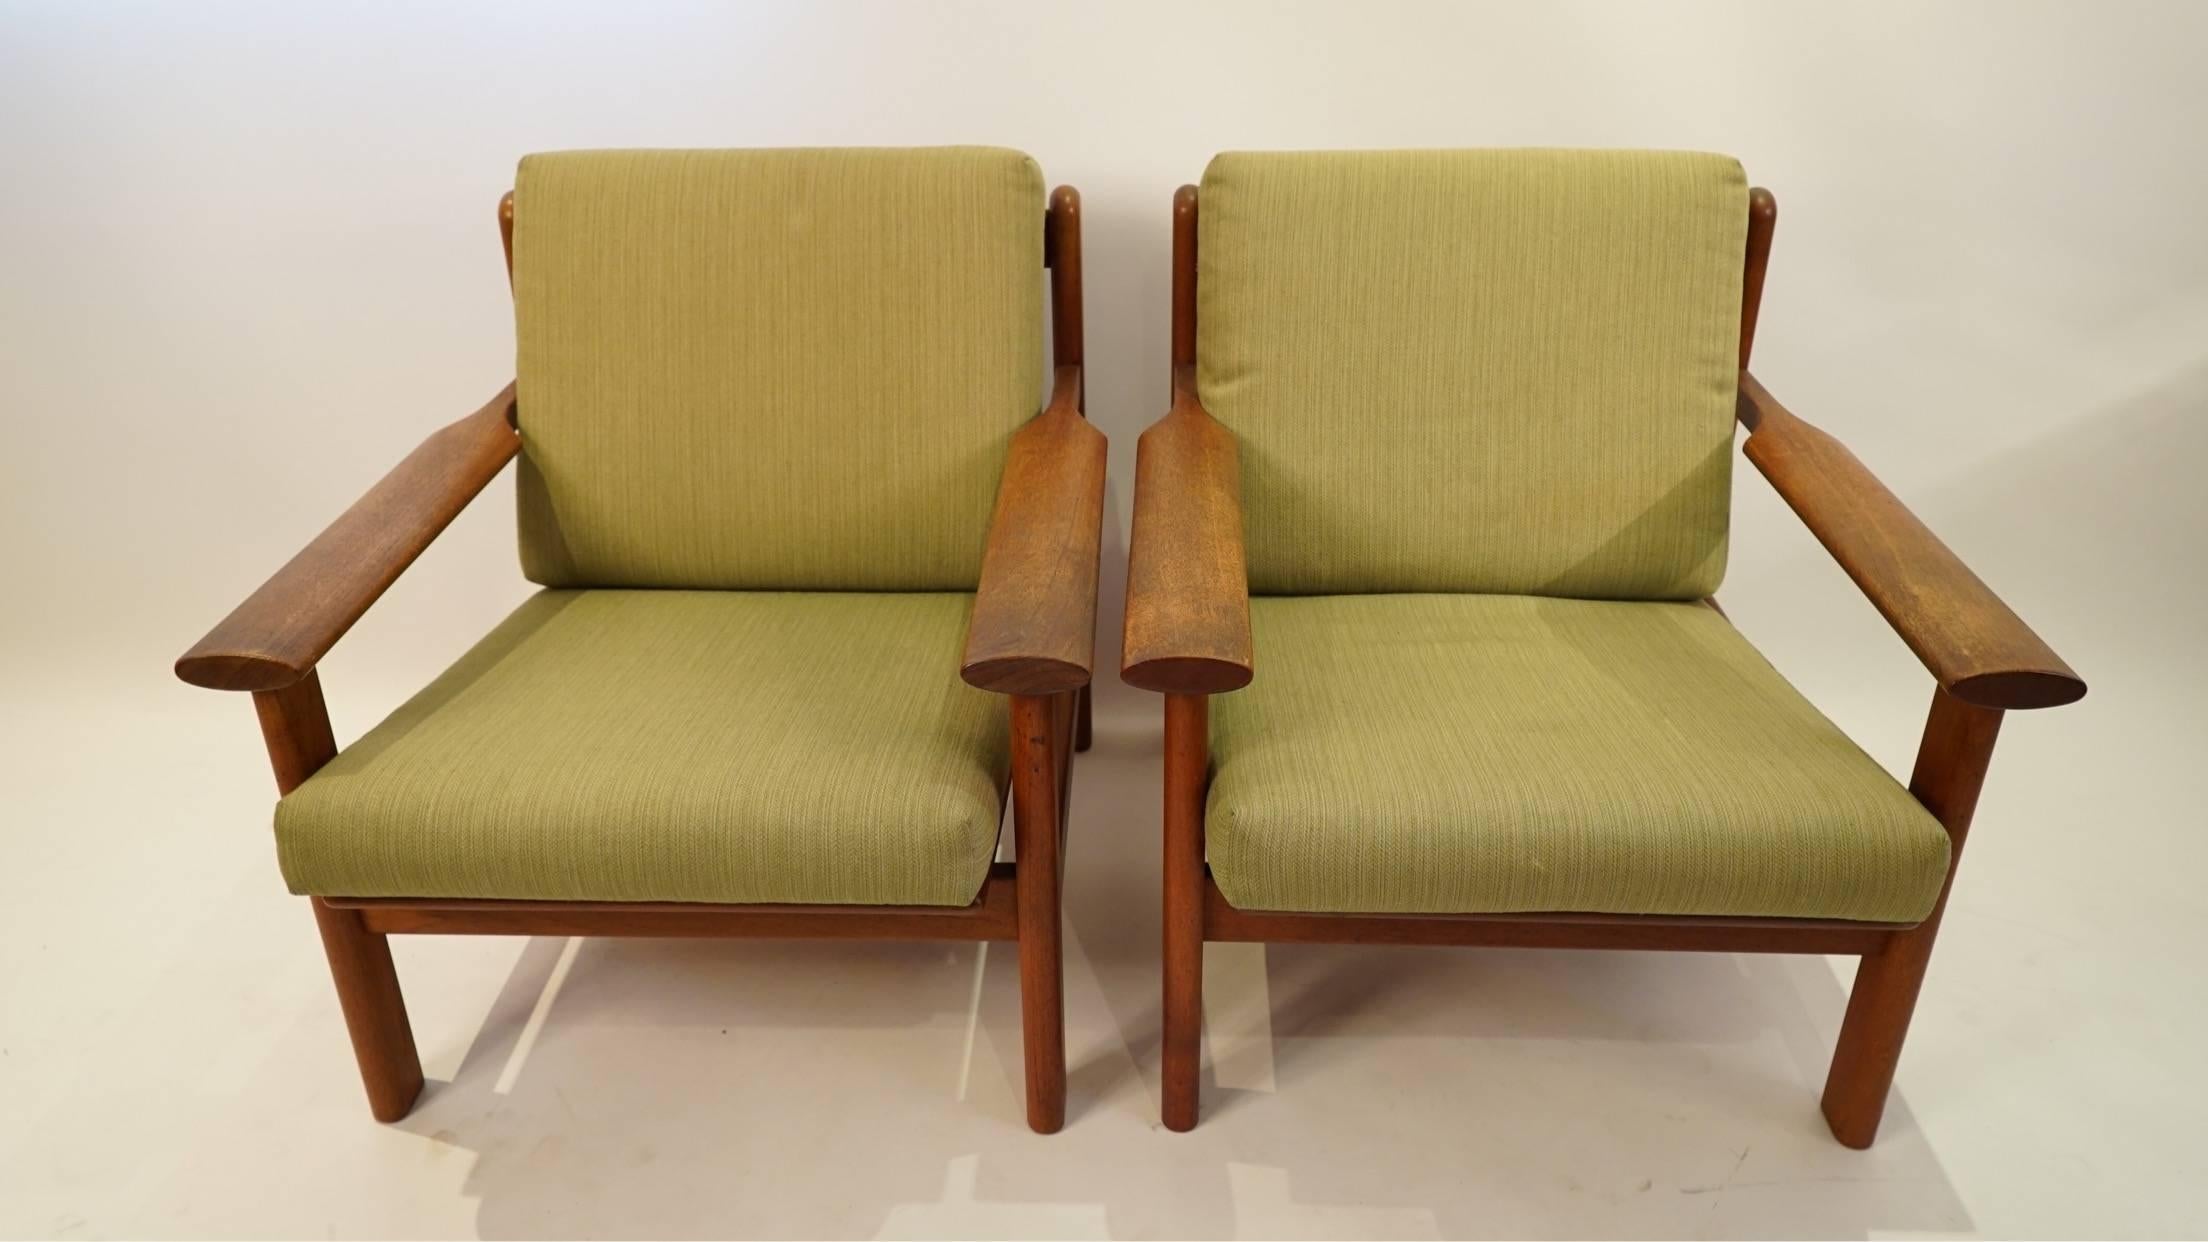 Exceptional danish craftsmanship executed in teak by designer Poul Volther for manufacturer Frem Rølje. These chairs were produced in the late 50s. The design features: back uprights with rounded finals, paddle armrests with notched ends, back